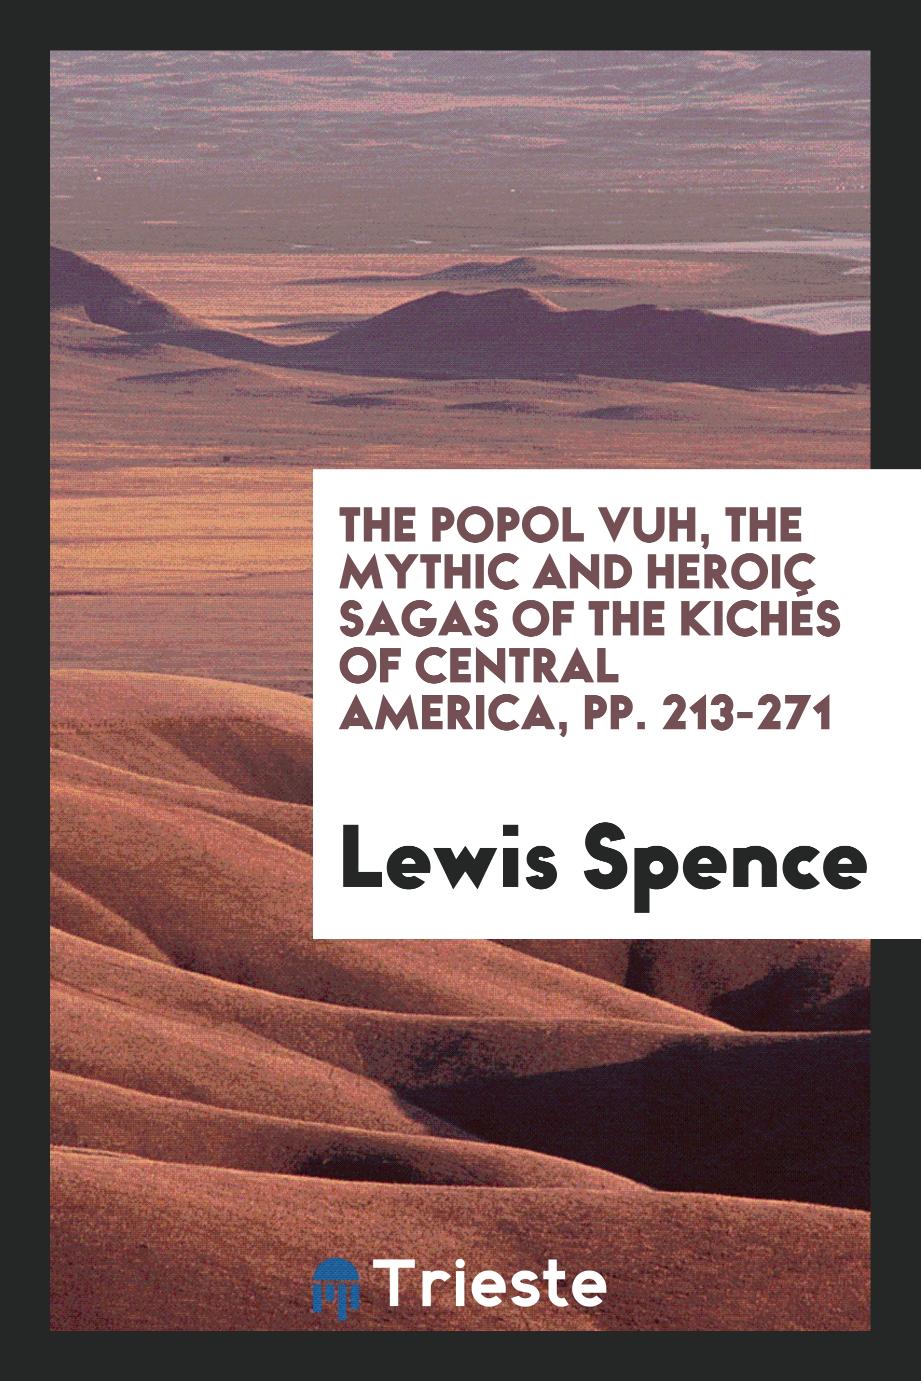 The Popol Vuh, the Mythic and Heroic Sagas of the Kichés of Central America, pp. 213-271